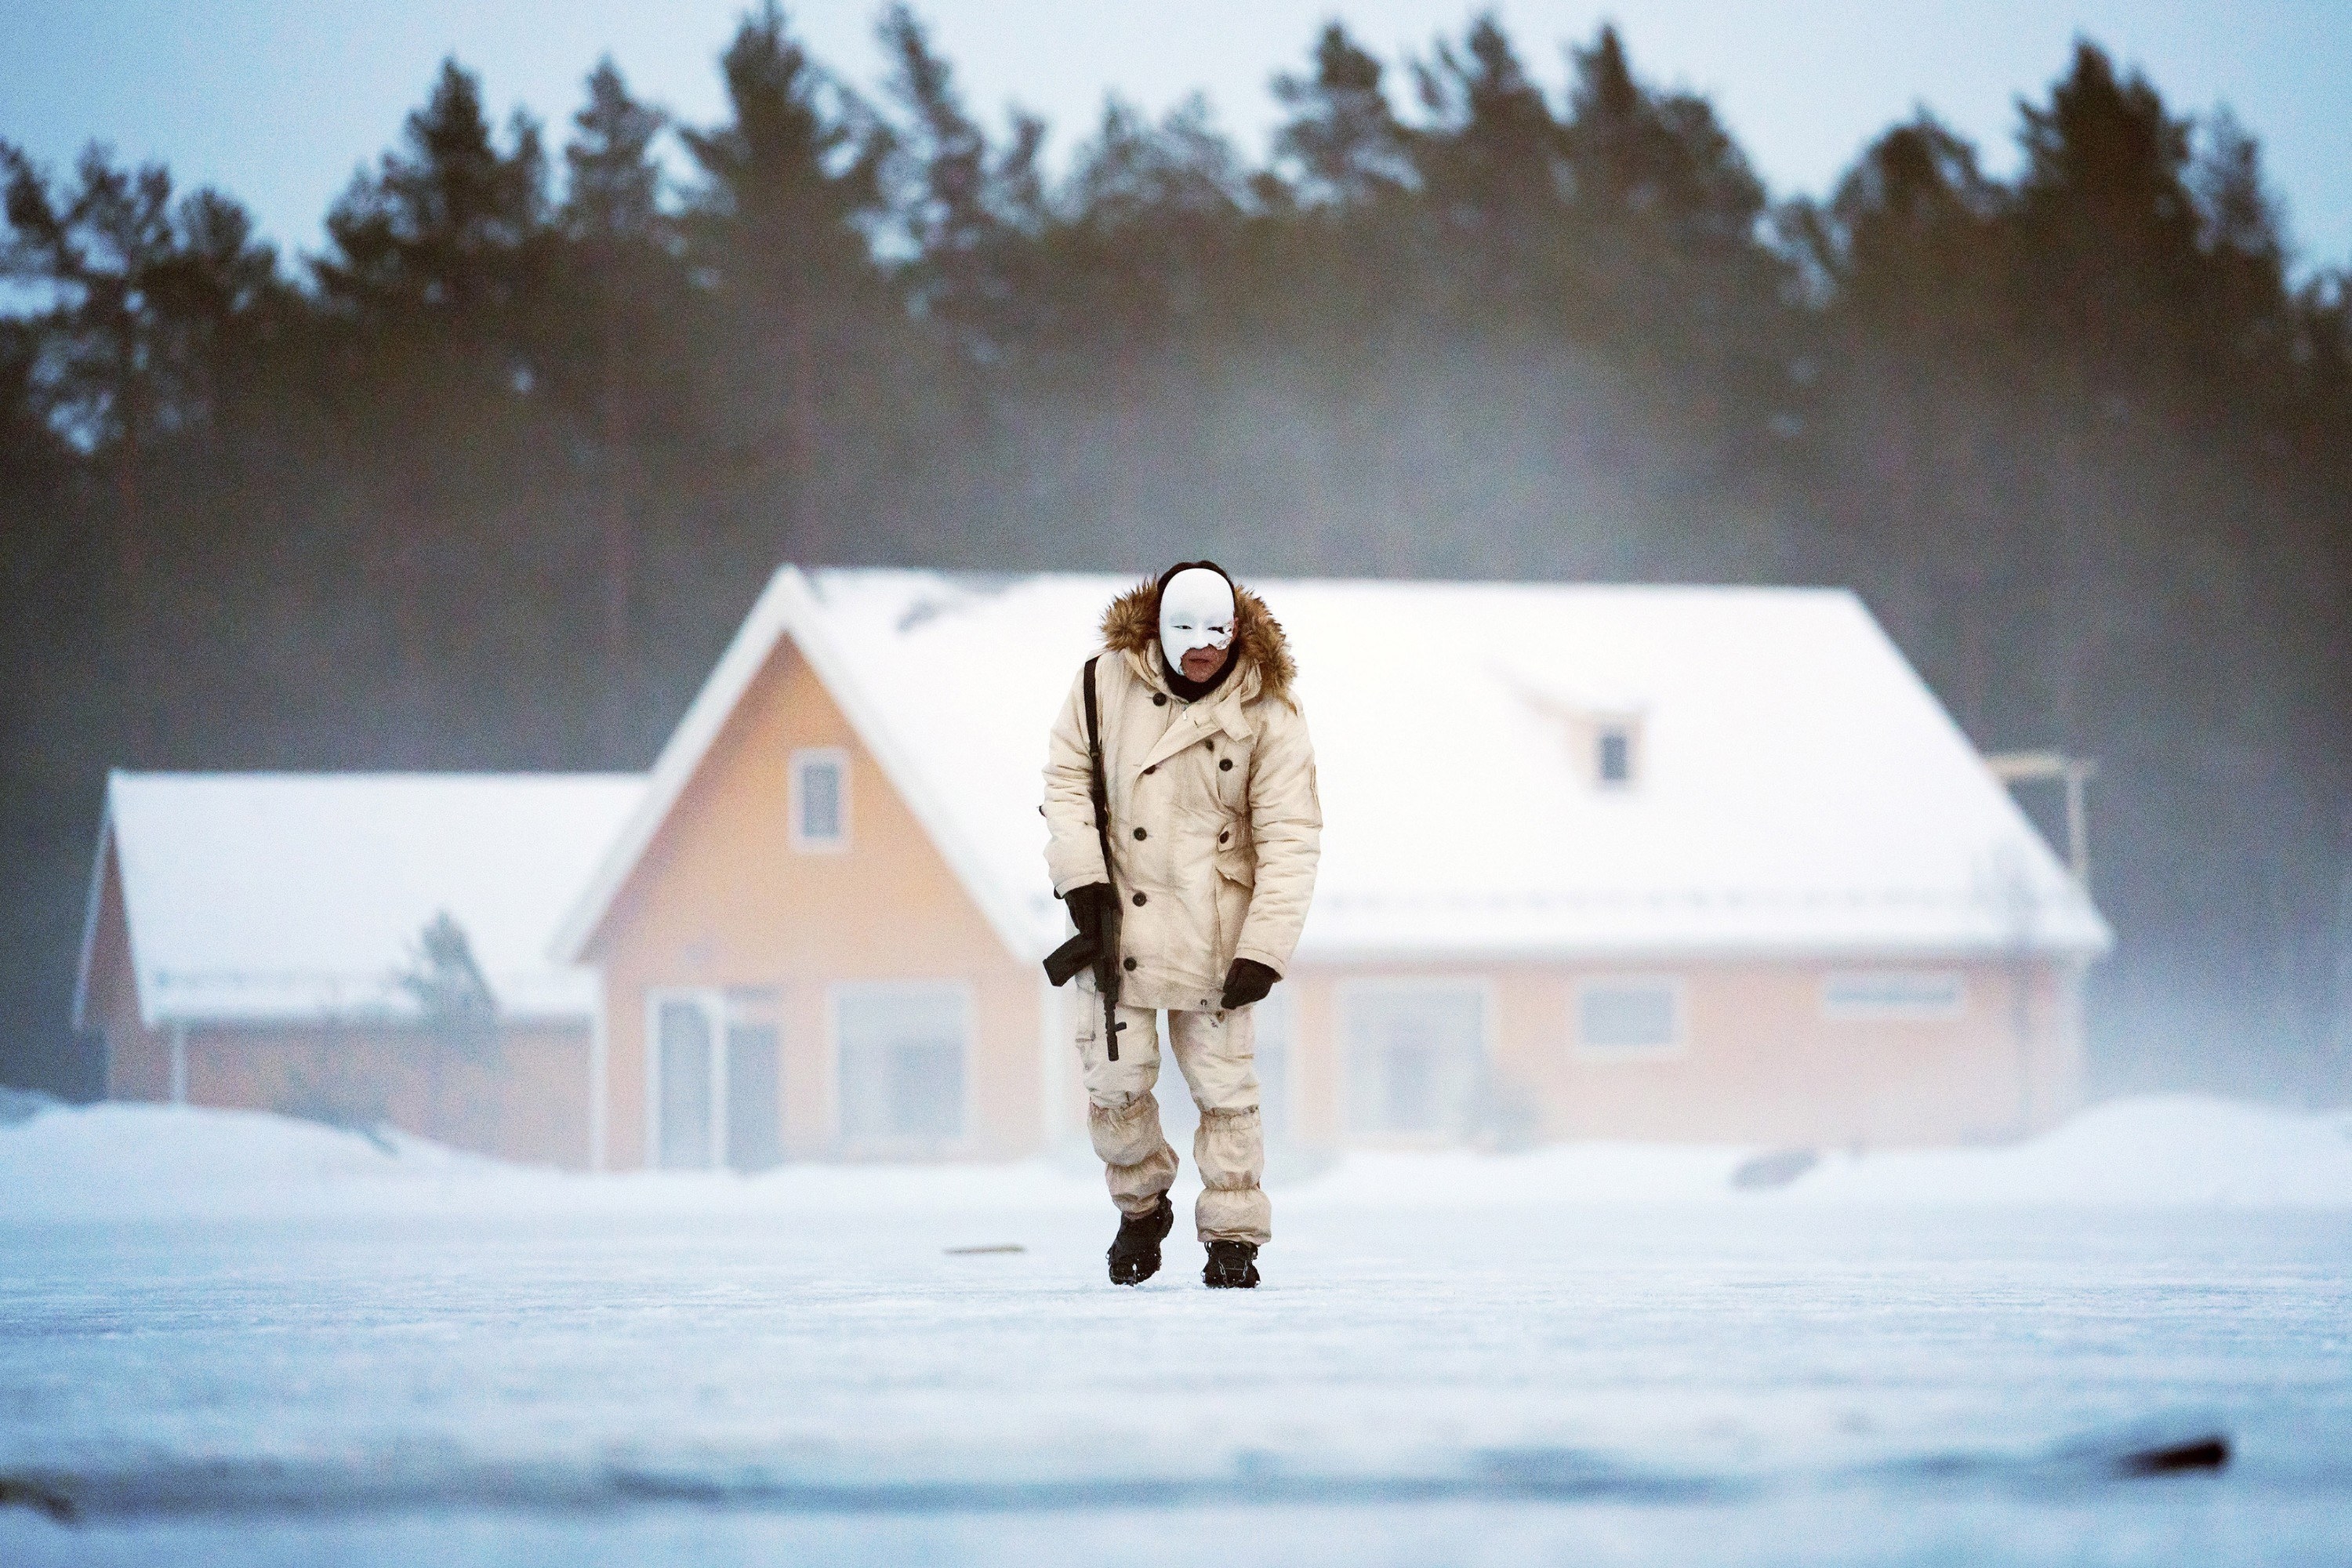 Safin in a snowsuit and the Noh mask